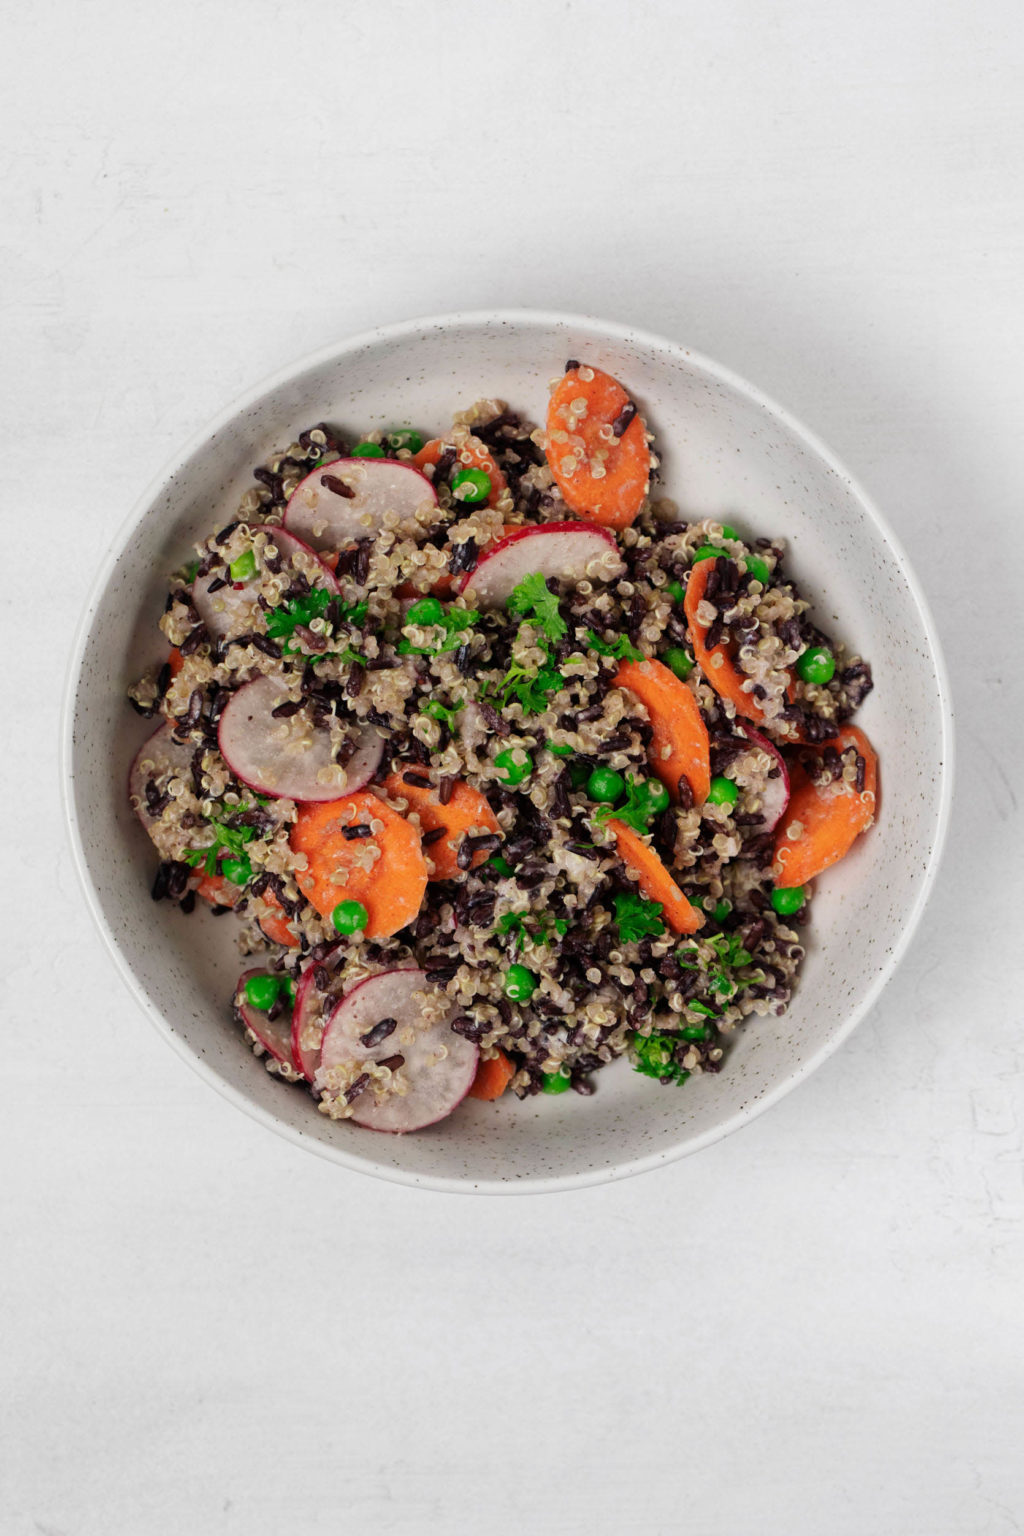 A plant-based grain salad with carrots and peas is served with herbs in a white, round serving bowl.